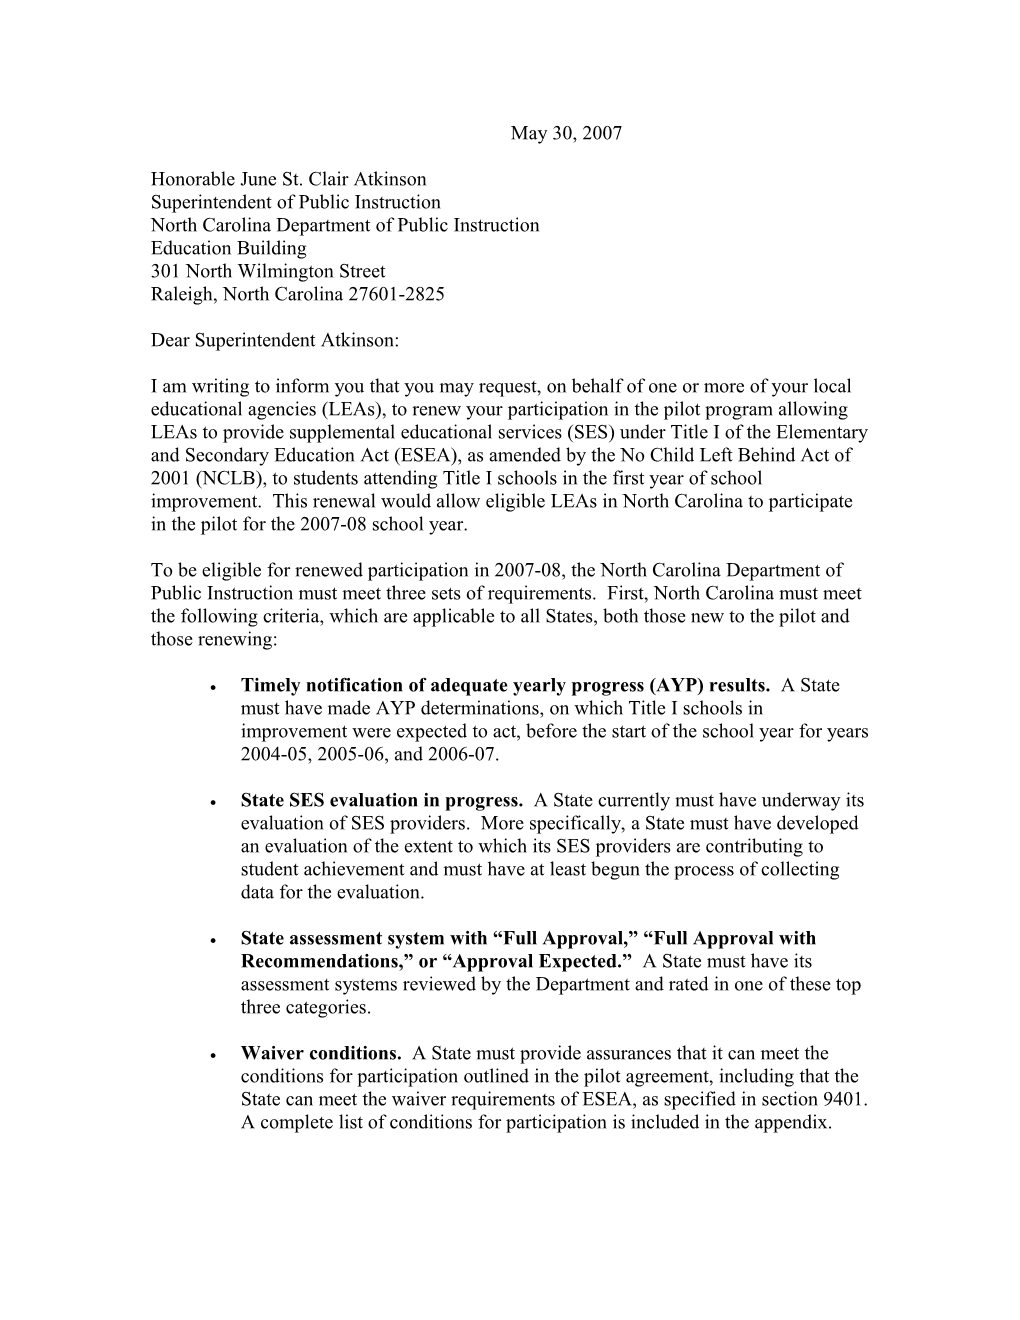 Renewal Letter to NC to Reapply for SES Pilot Program (MS Word)